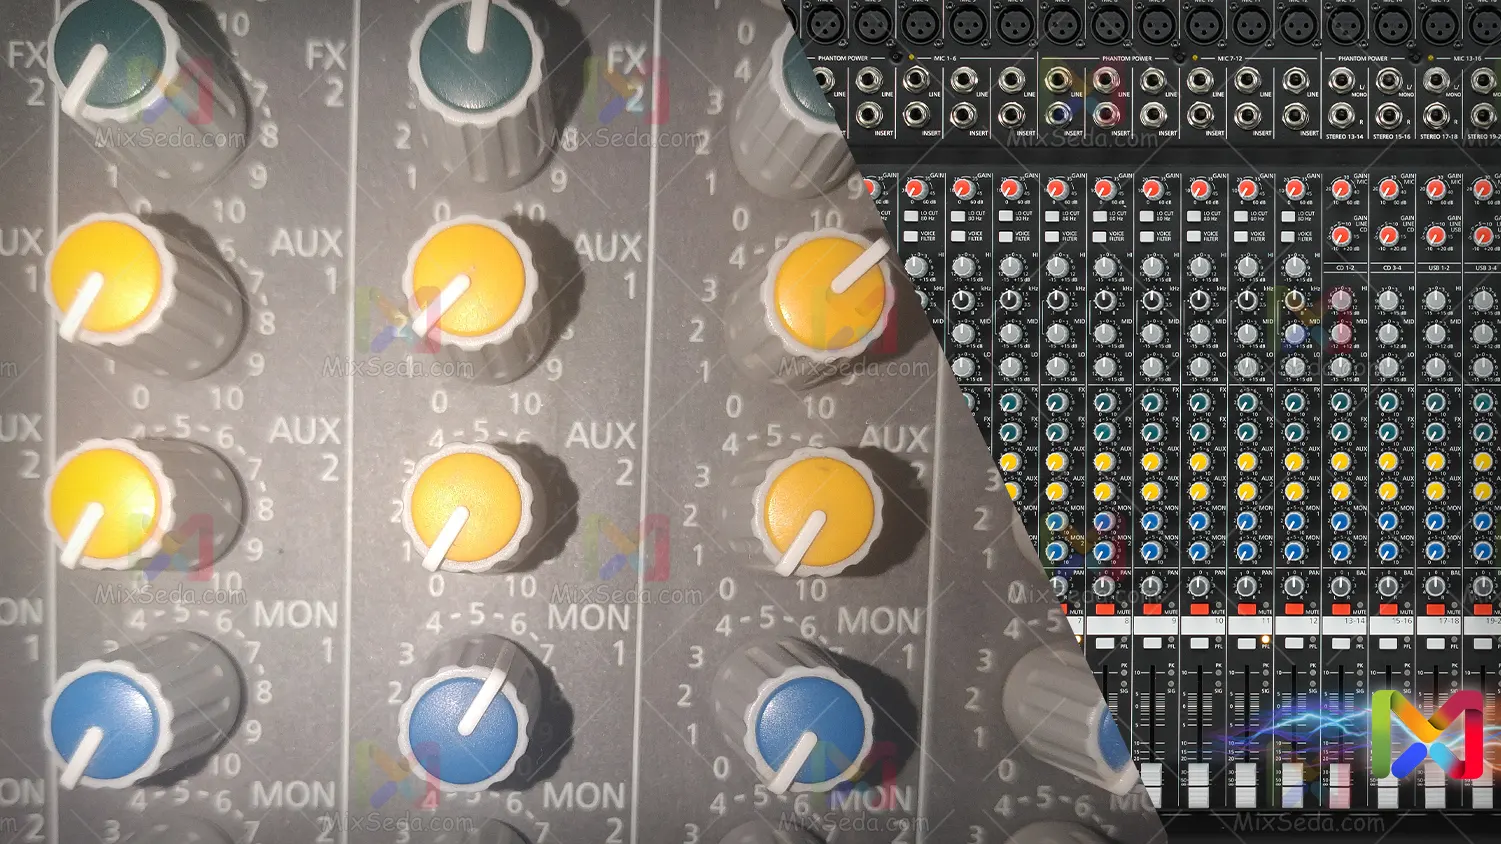 AUX volumes in the Dynacord mixer